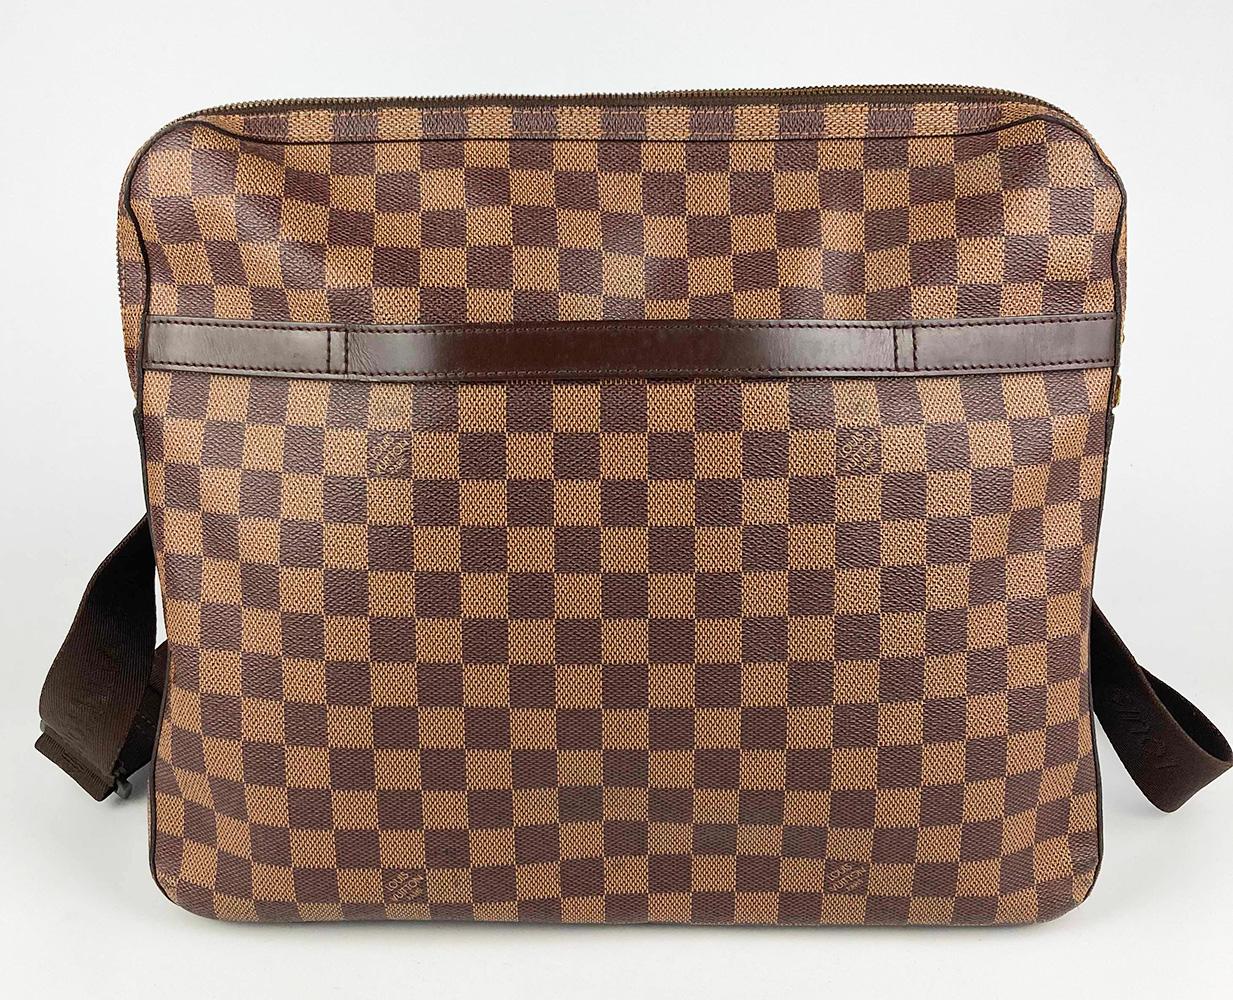 Louis Vuitton Damier Ebene Dorsoduro Messenger Bag in very good condition. Signature checkered print damier eben canvas in brown and dark brown trimmed with gold brass hardware, drak brown leather and a dark brown nylon shoulder strap. One exterior